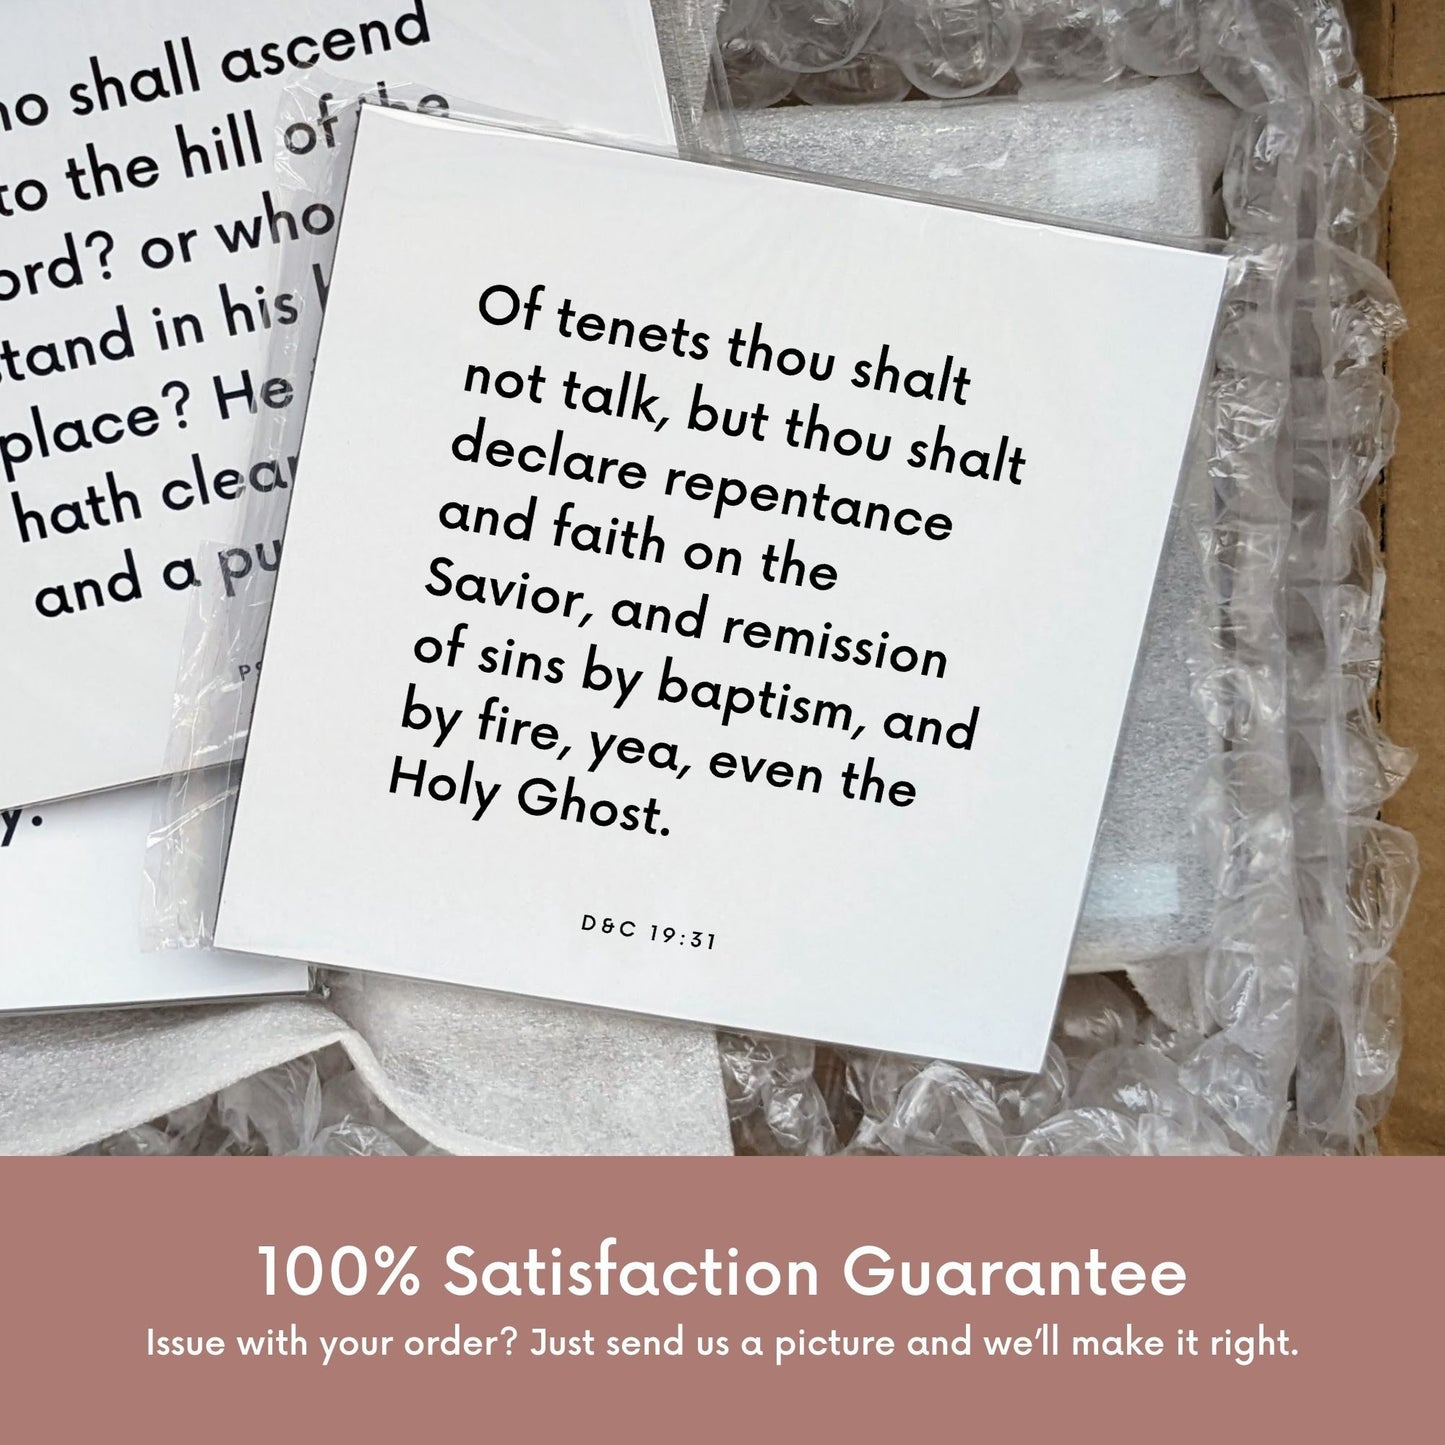 Shipping materials for scripture tile of D&C 19:31 - "Thou shalt declare repentance and faith on the Savior"